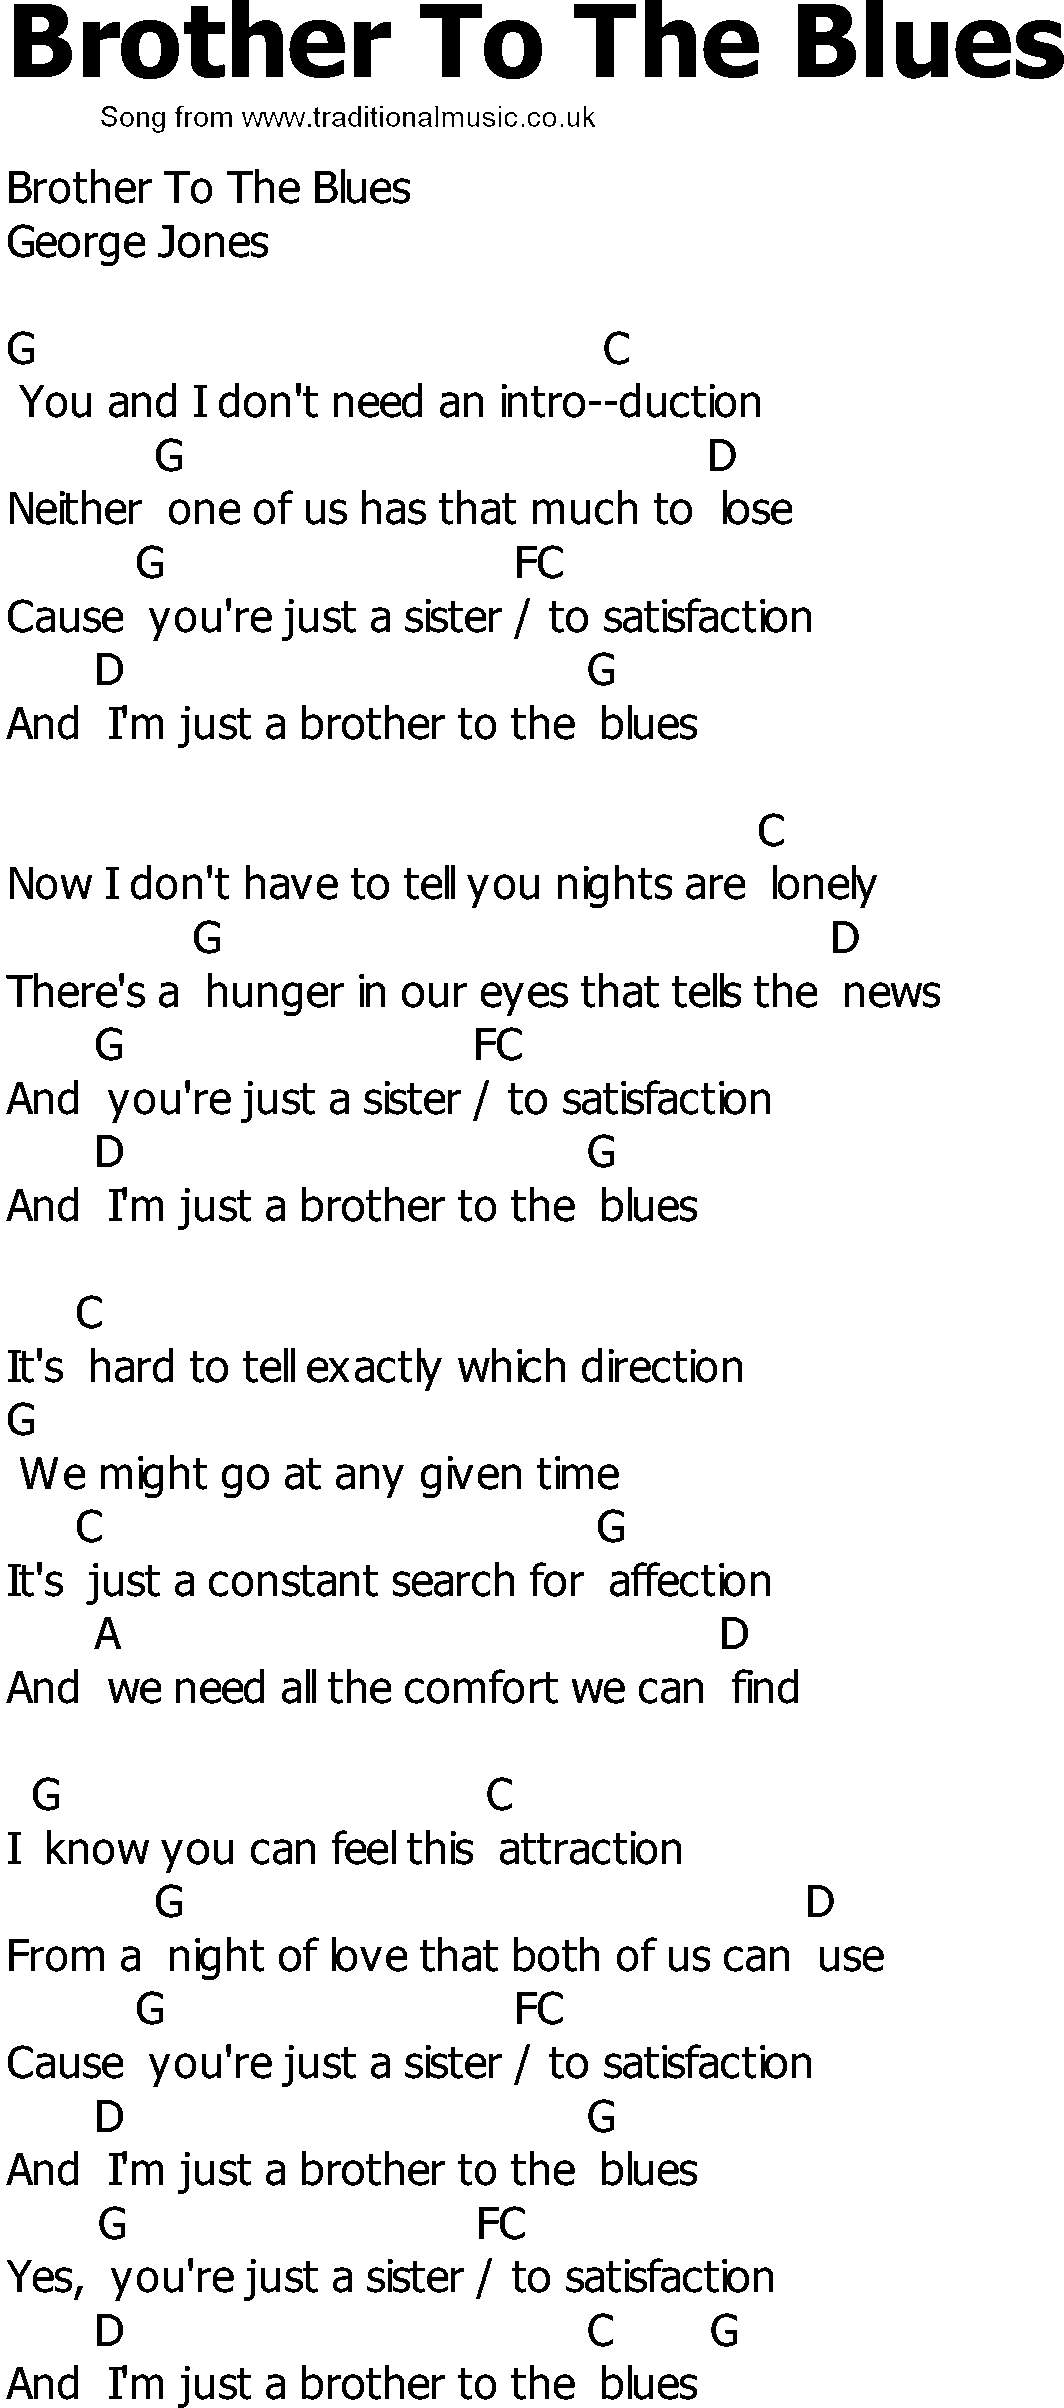 Old Country song lyrics with chords - Brother To The Blues